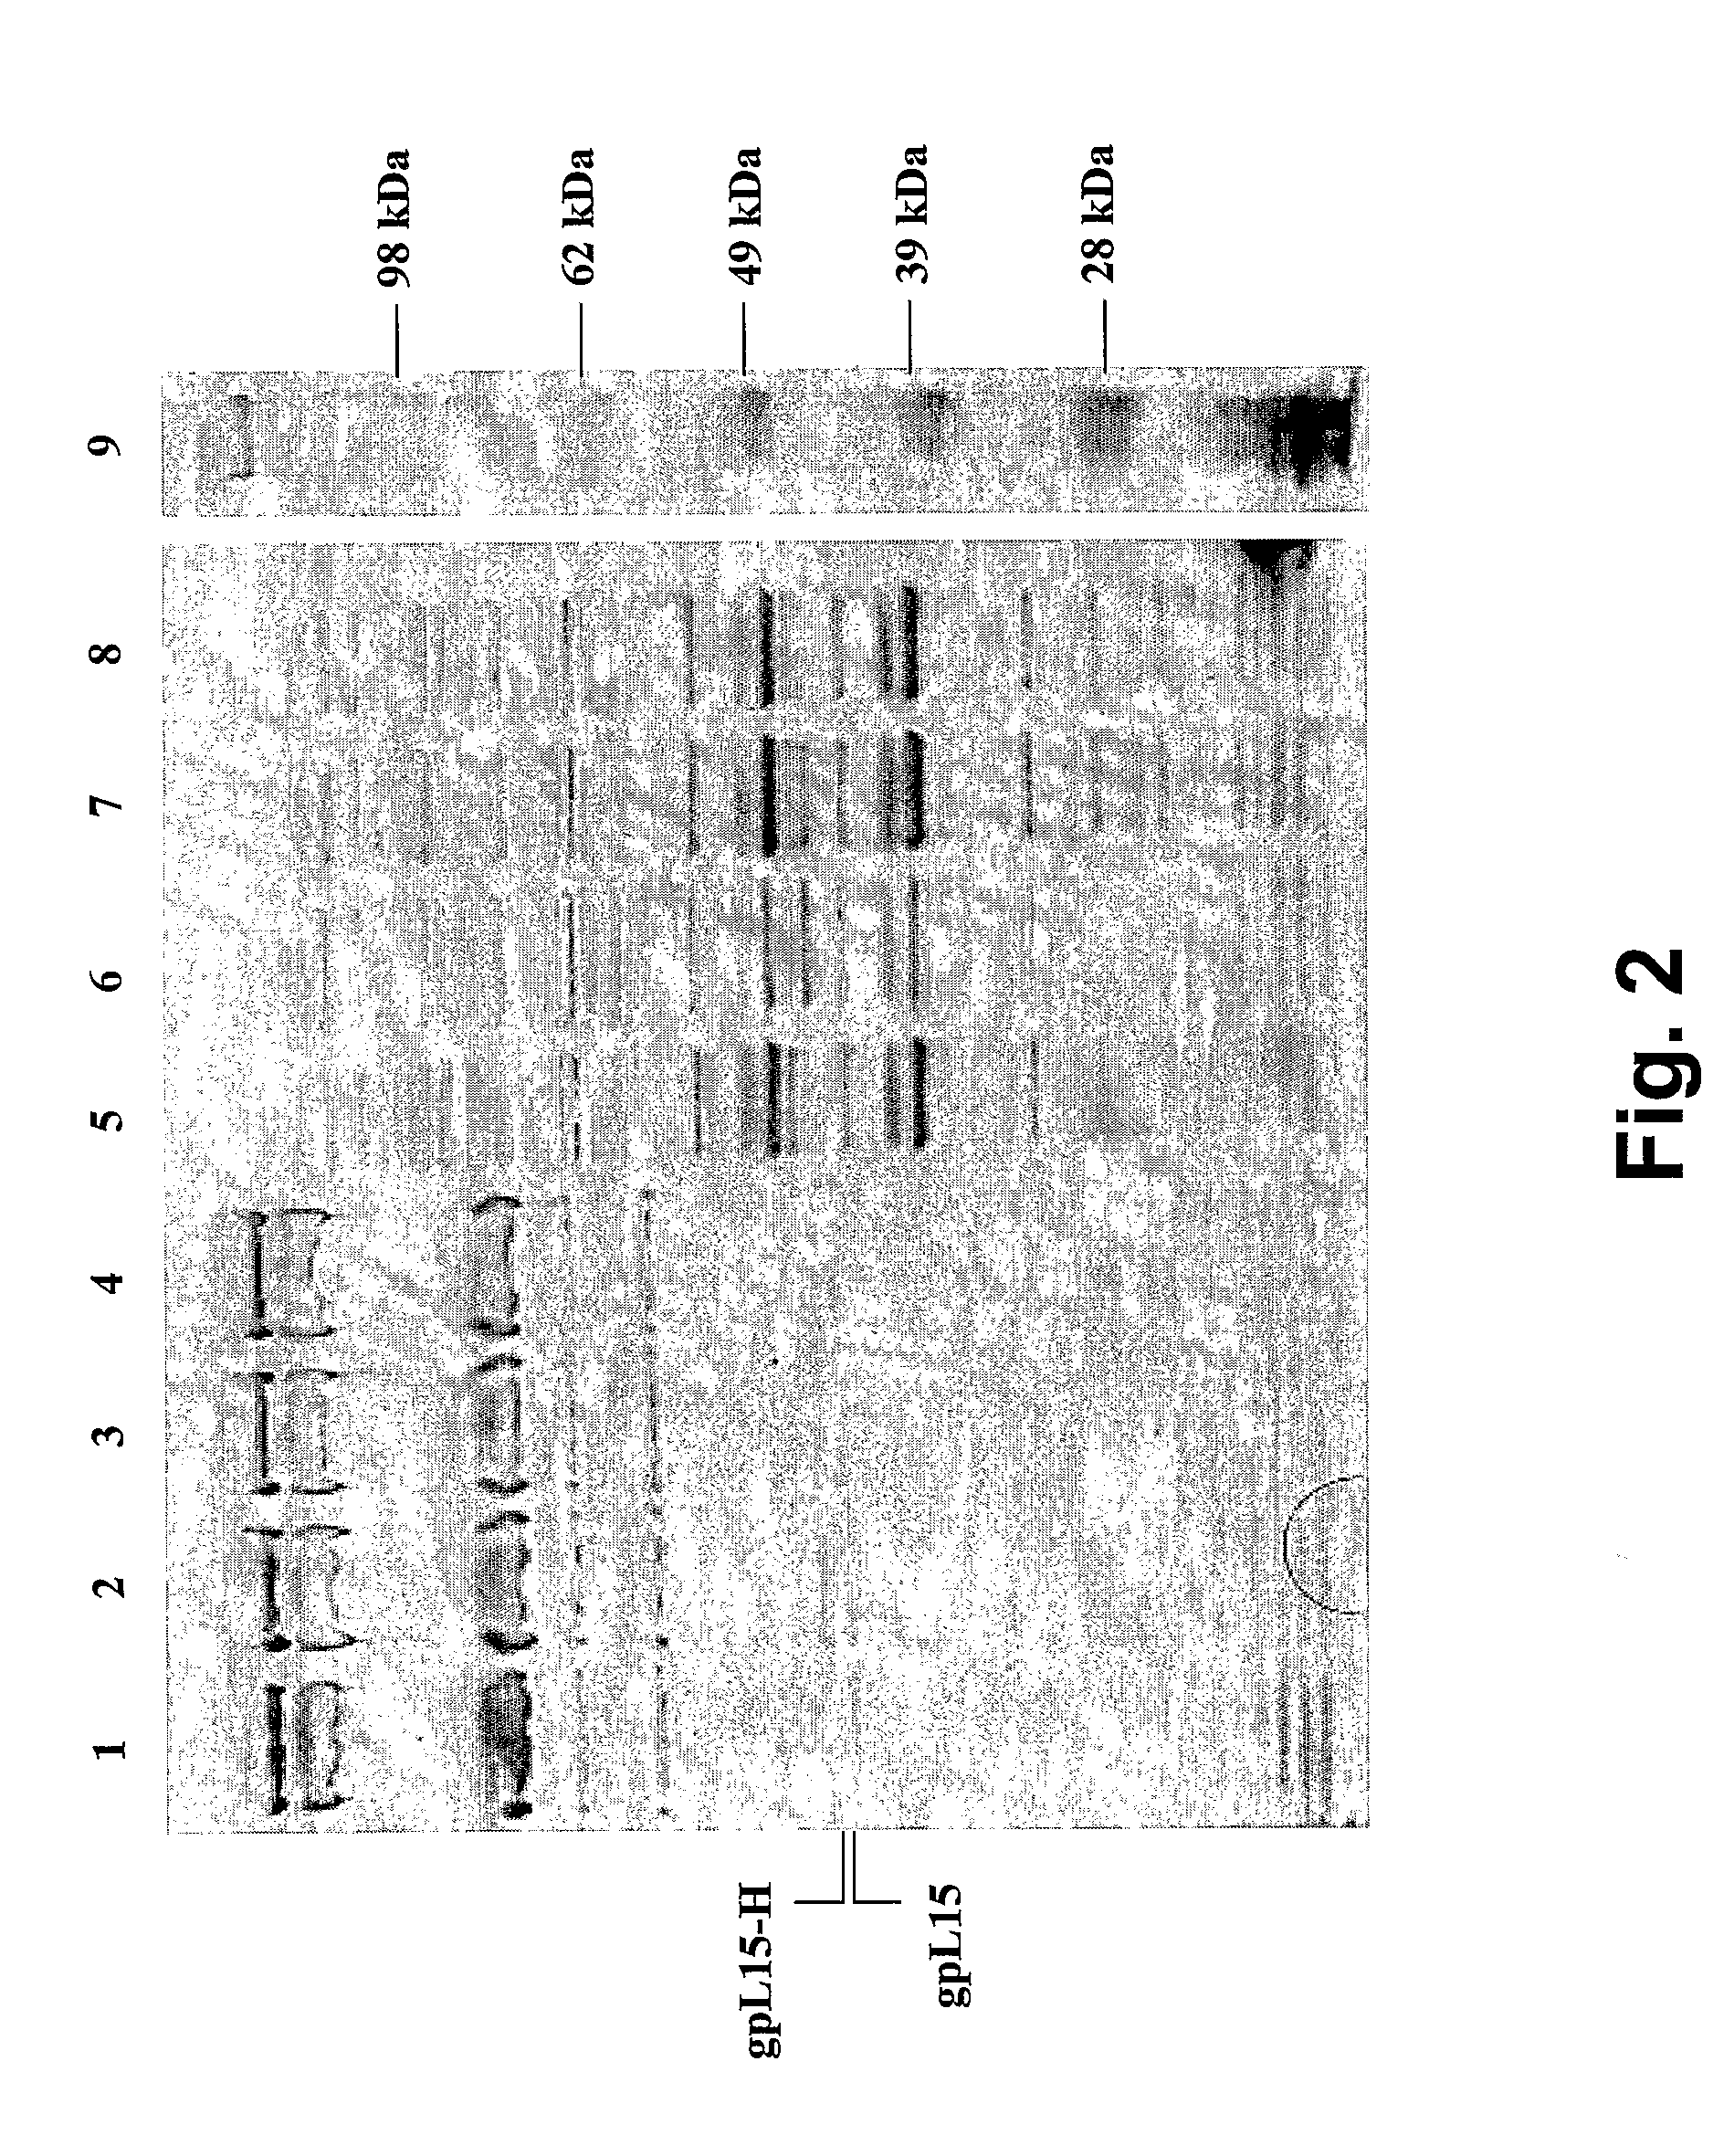 Chimeric Bacteriophages, Chimeric Phage-Like Particles, and Chimeric Phage Ghost Particles, Methods for Their Production and Use